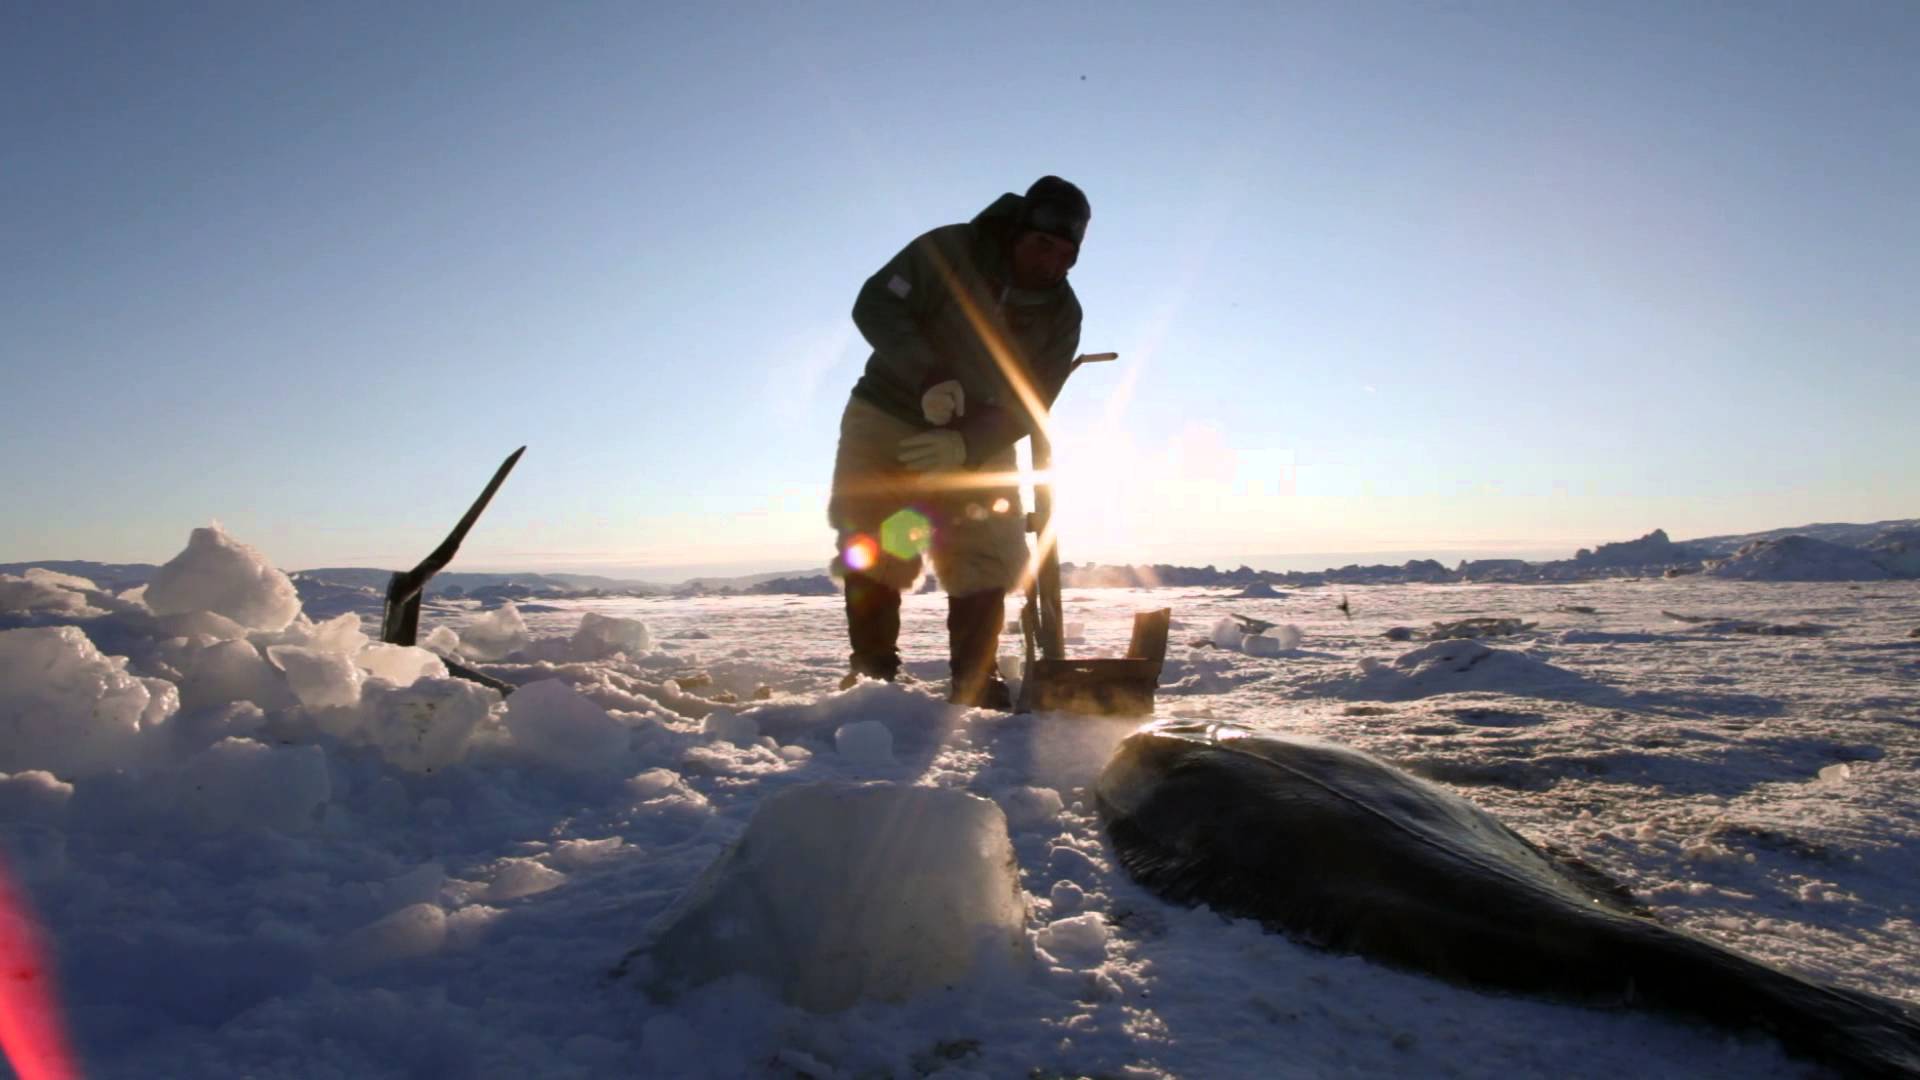 Inuit Culture in Greenland - YouTube